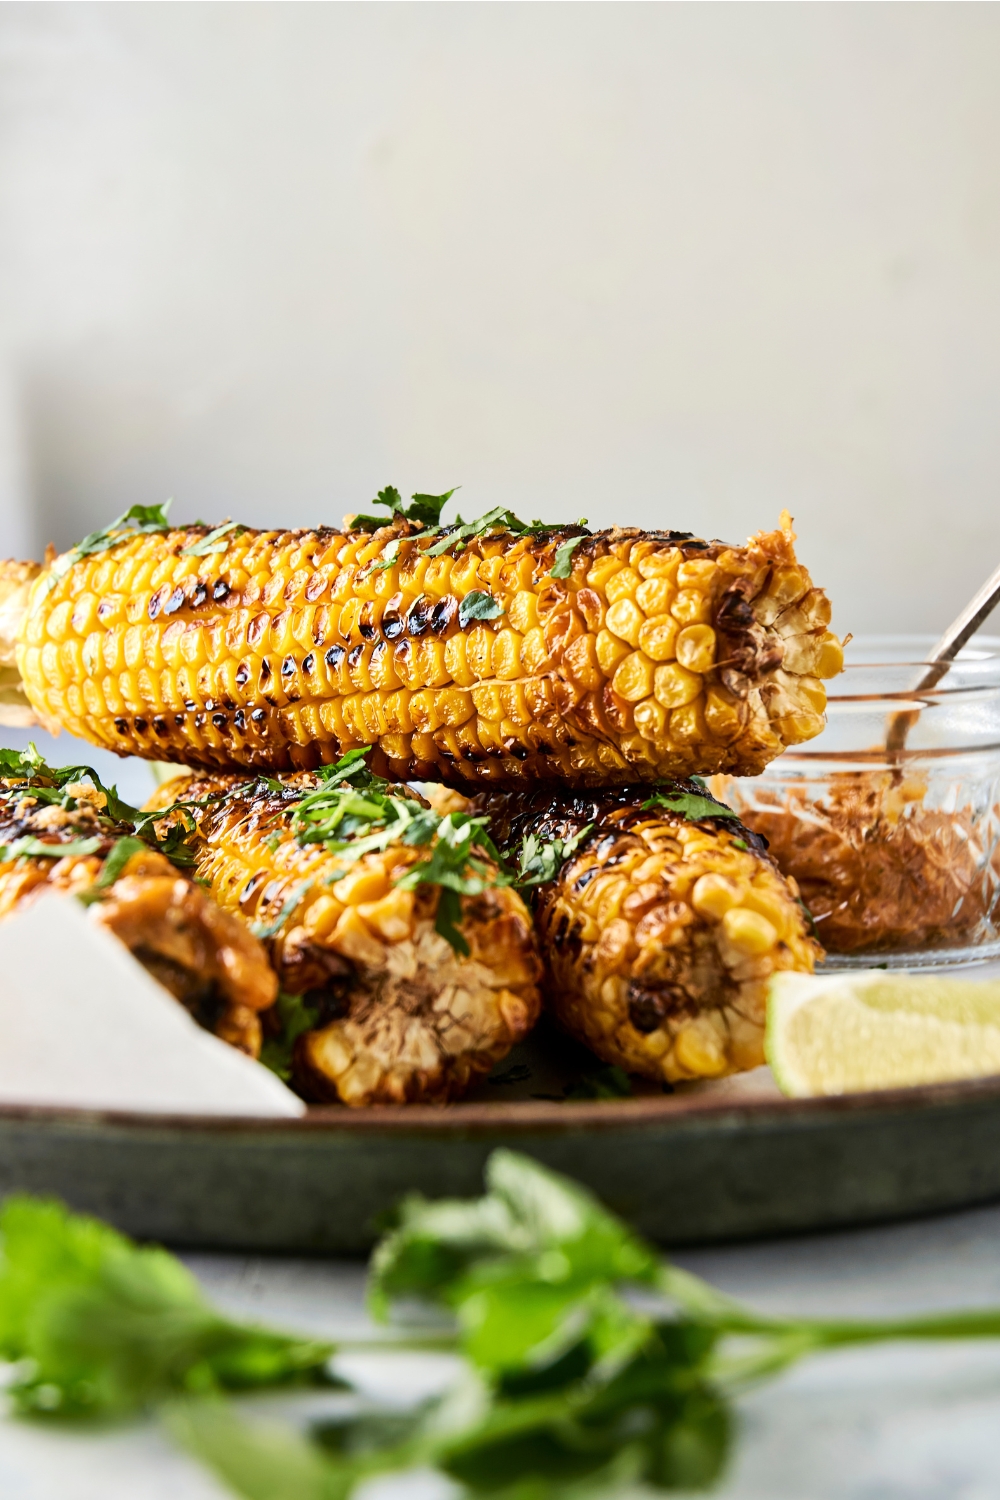 Four ears of corn are on a serving plate. They have been grilled and garnished with fresh cilantro.